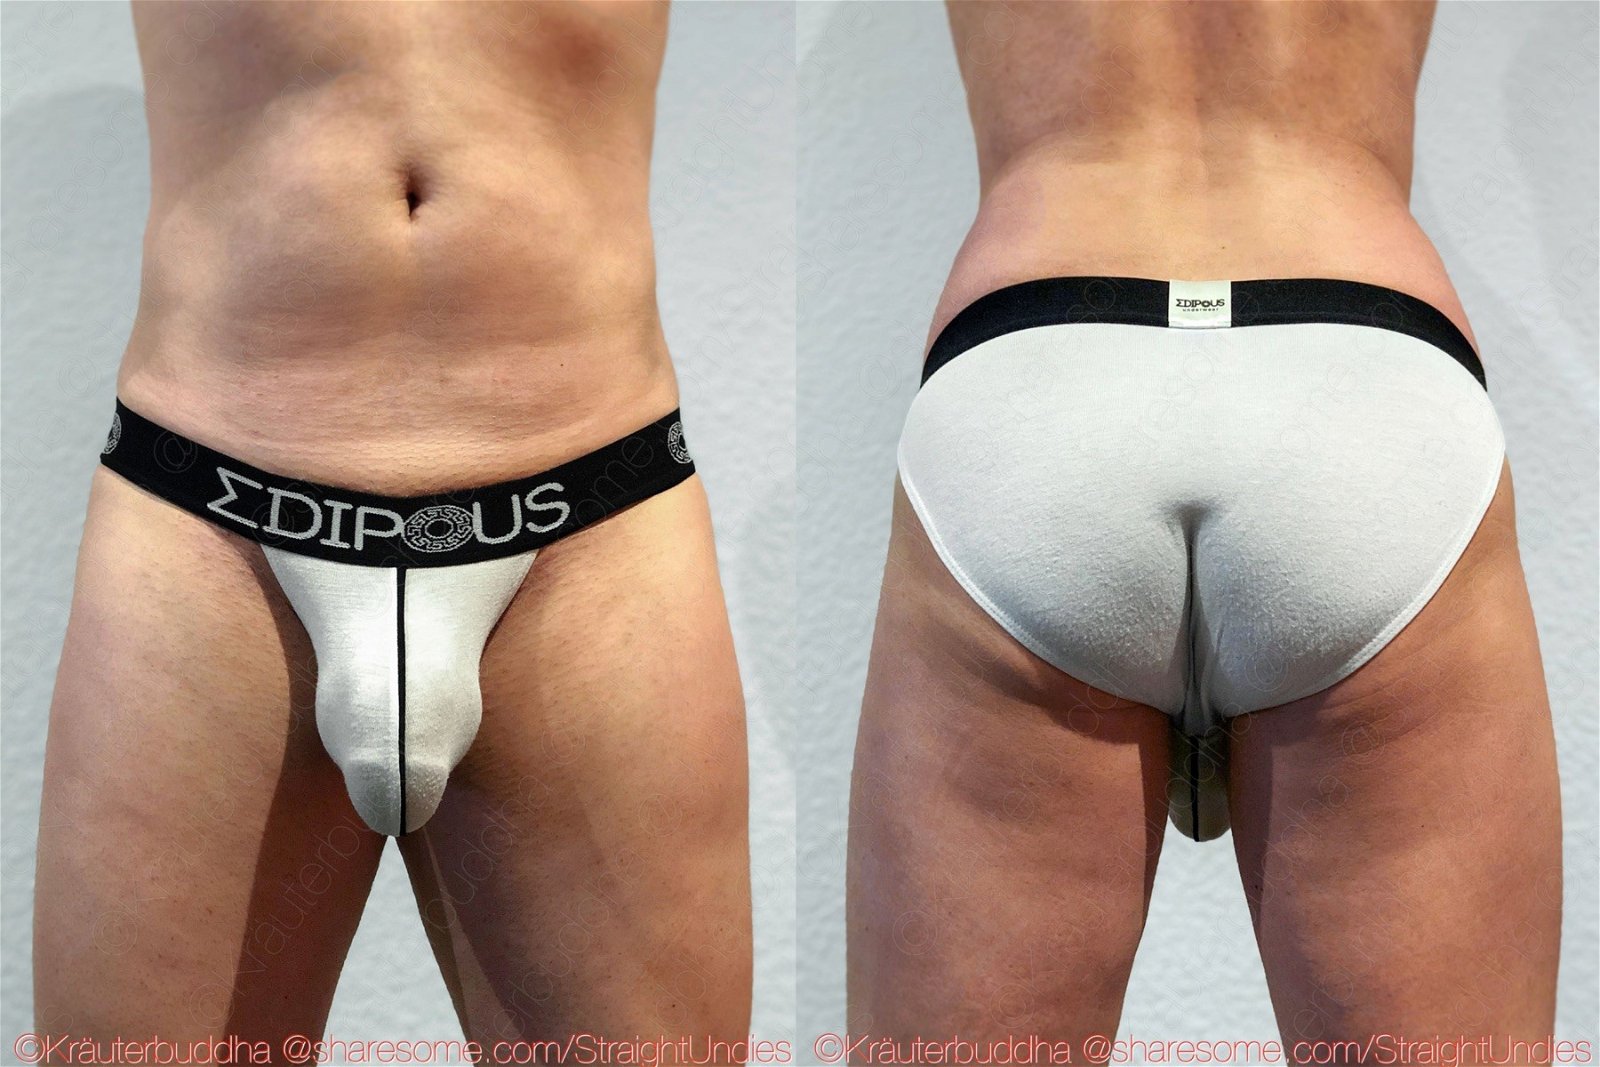 Watch the Photo by Kräuterbuddha with the username @StraightUndies, who is a verified user, posted on January 12, 2019. The post is about the topic Straight Underwear. and the text says 'Edipous
#underwear #mensunderwear #briefs #edipous'